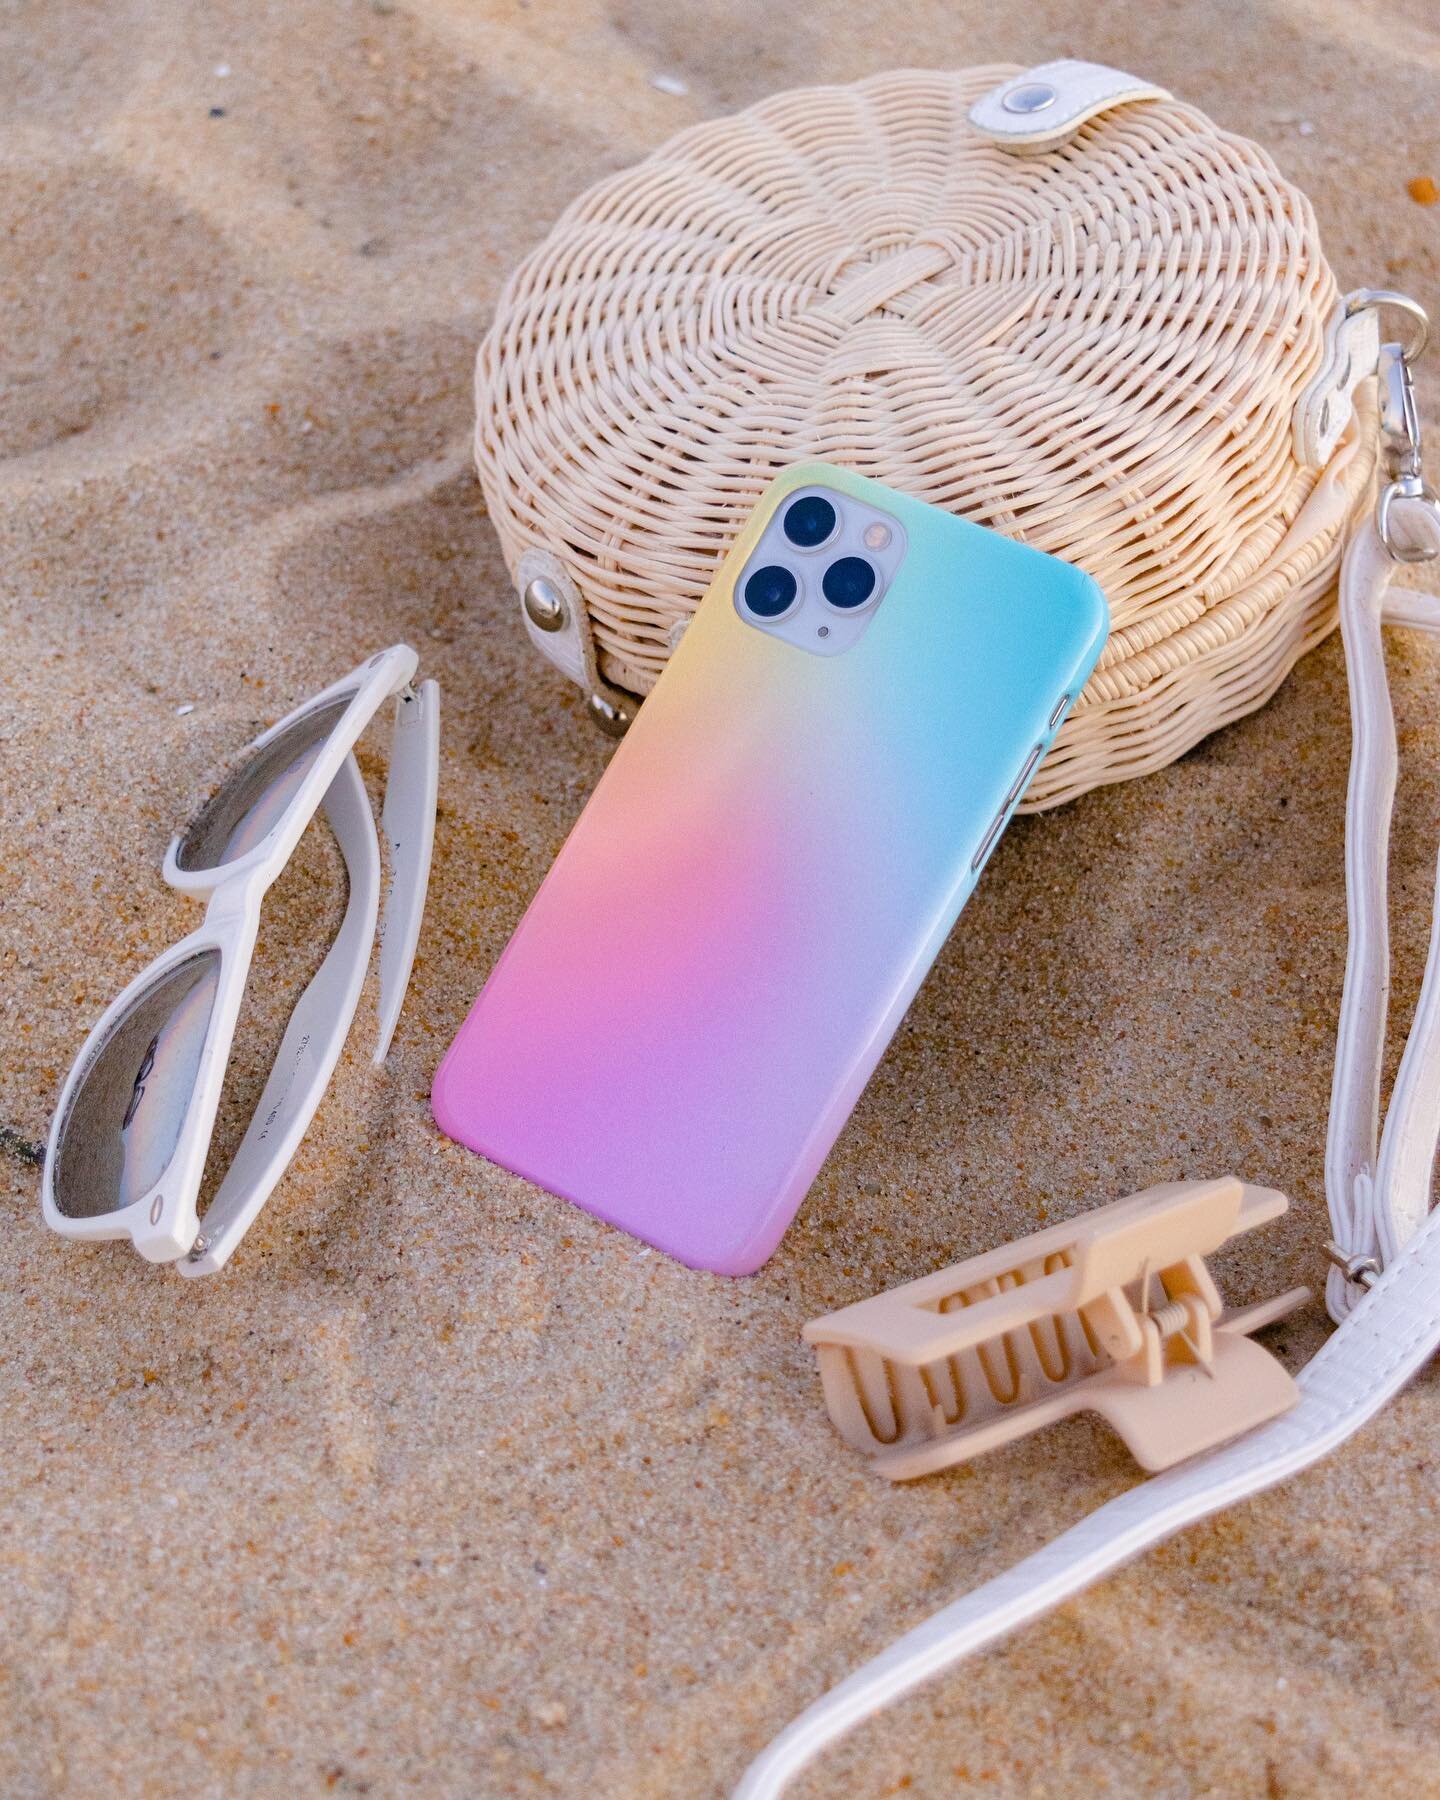 Summer might be over soon but my love of gradients is NEVER ending 💗🌈🦋

Shop the gradient phone case collection on Etsy to add a little color to your life 💕📱✨